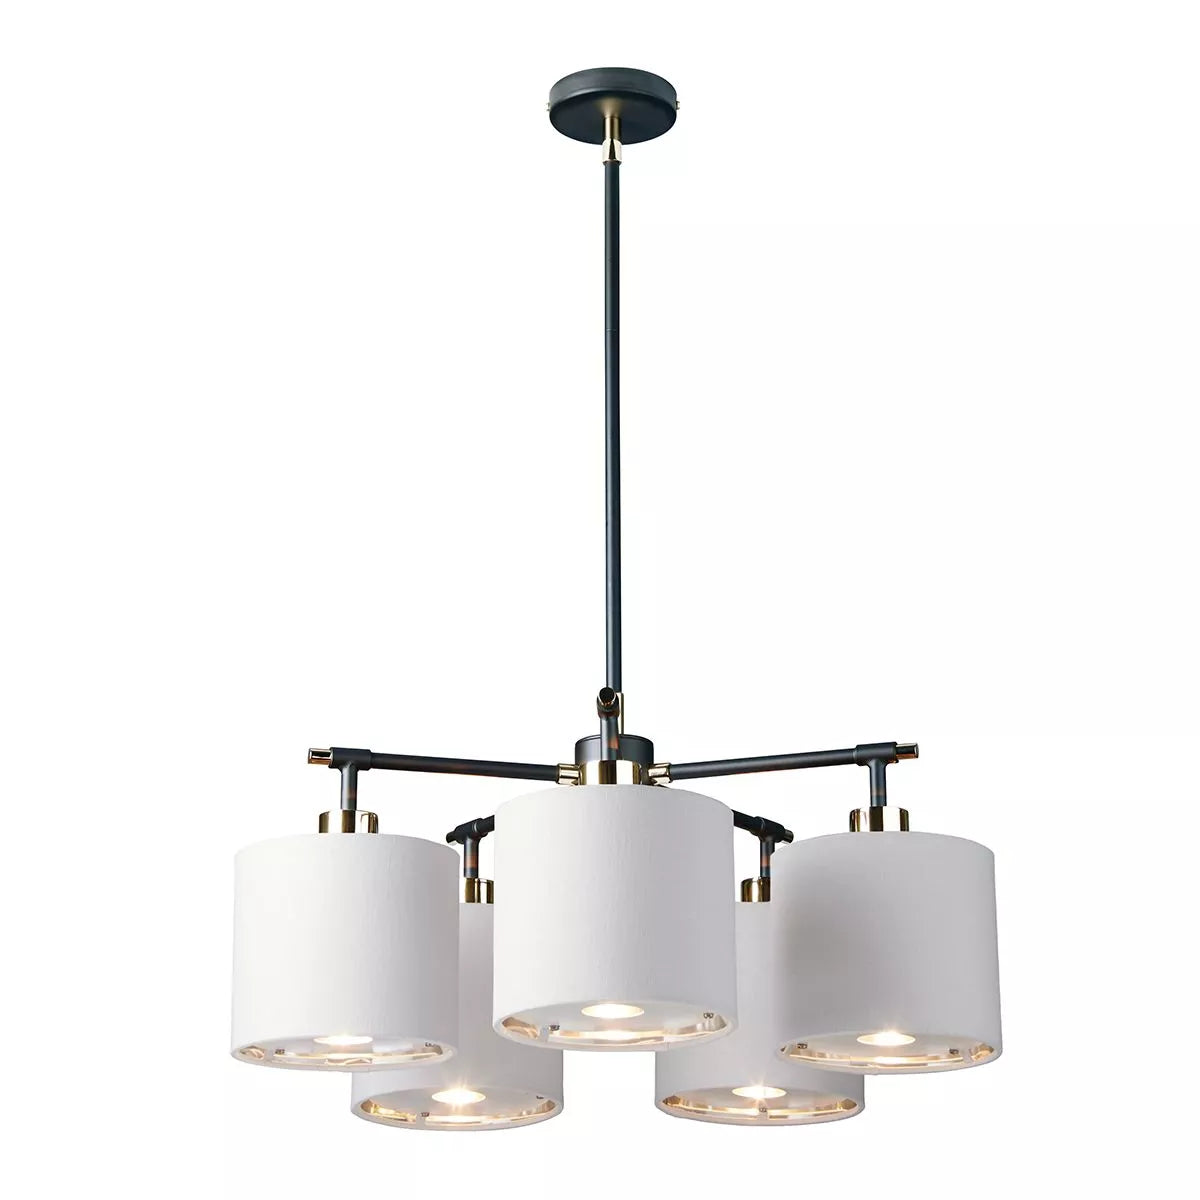 Elstead Balance 5 Light Chandelier, White Shades and Polished Nickel Accents KPN-BALANCE5